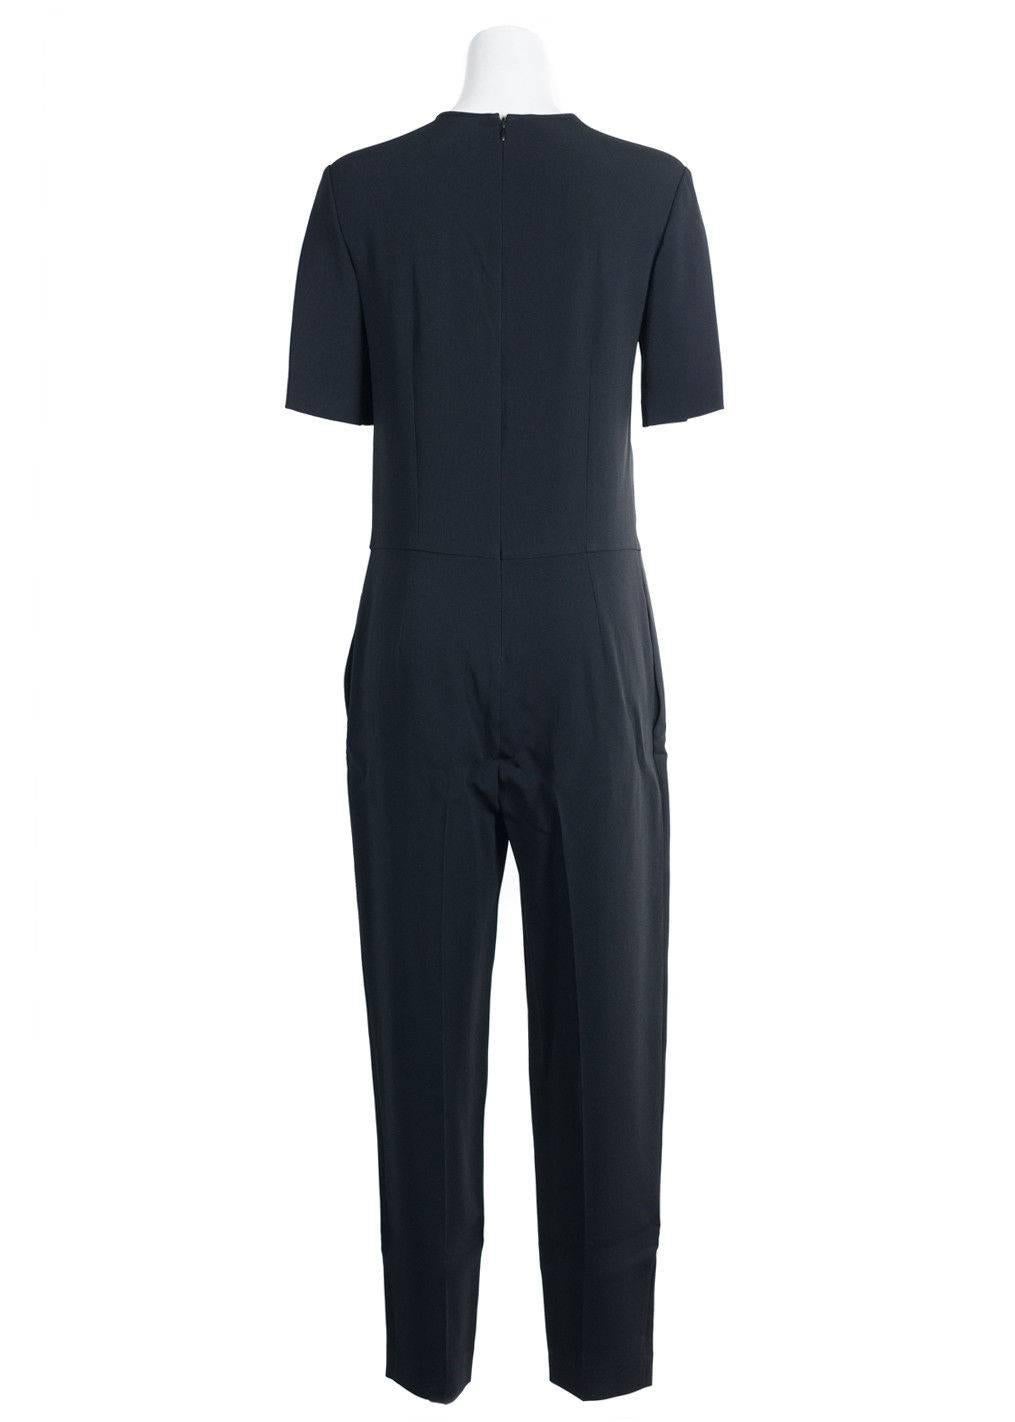 Brand New Stella McCartney Slim Cut Jumpsuit 
Original Tags 
Retails in Stores & Online for $1250
Size EUR 42 / US 10

Remain graceful in your Stella McCartney Jumpsuit. This casually elegant one piece features subtle pleating and a slim leg. The